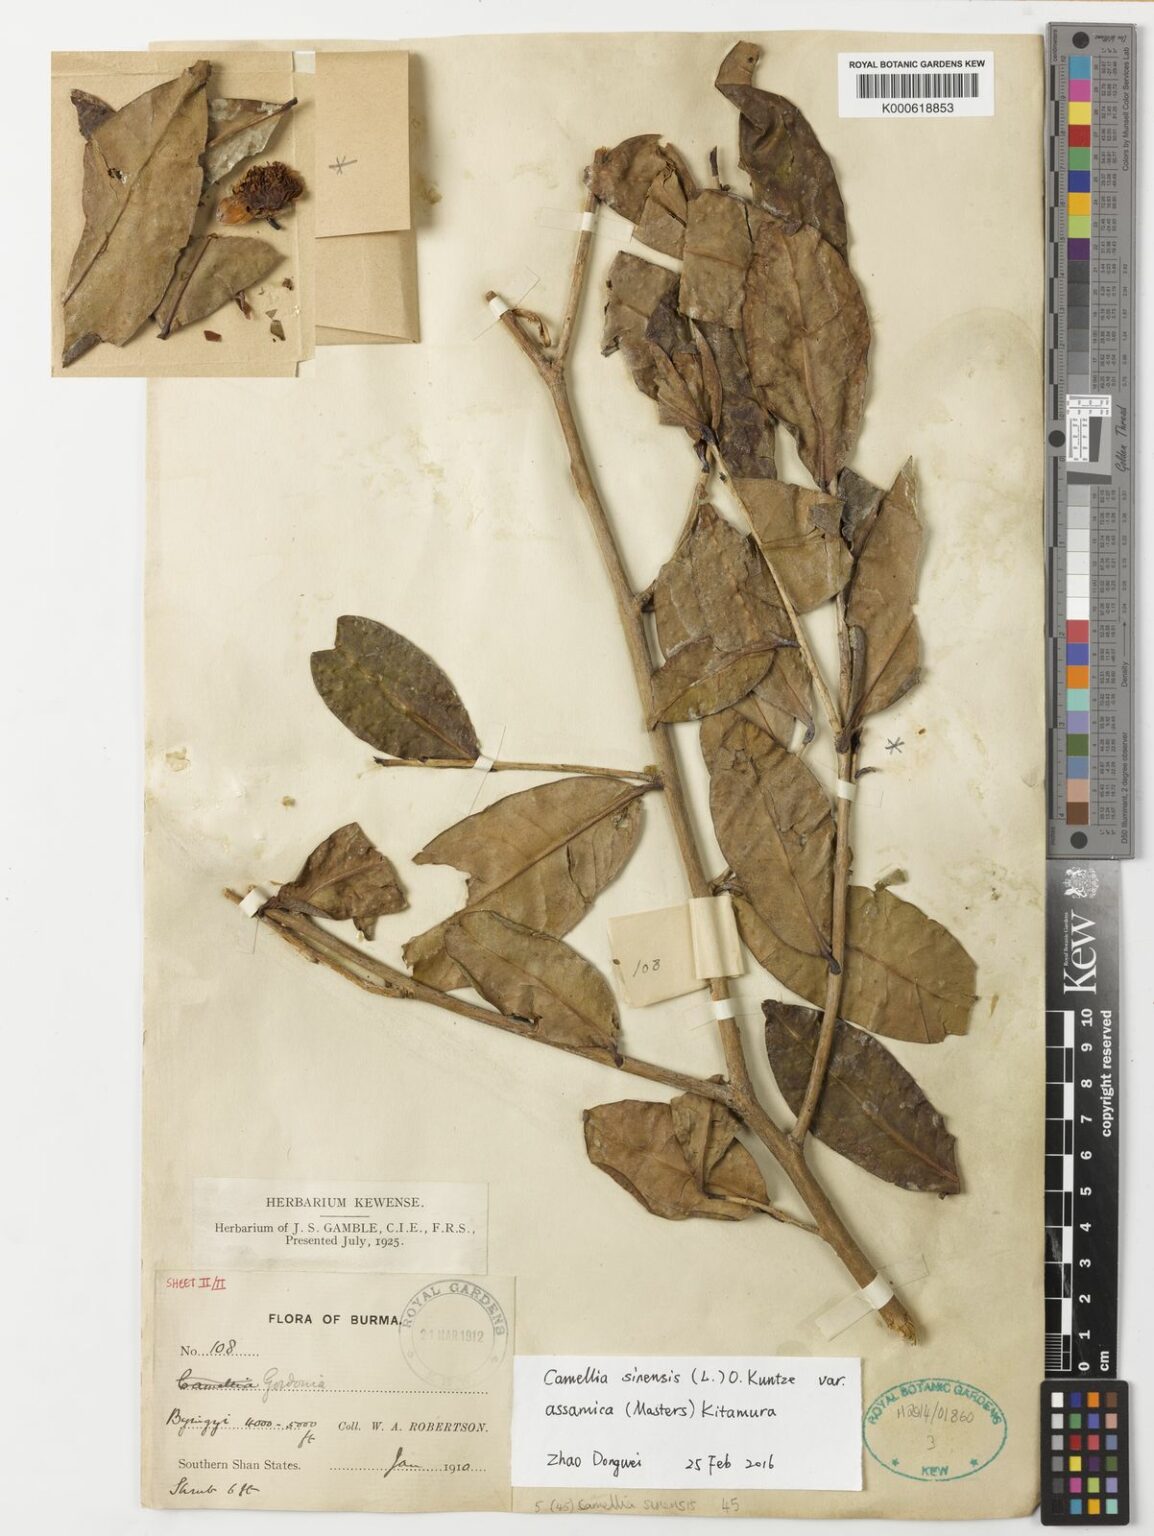 The Assamica specimen was collected in 1949 for Kew Royal Botanic Gardens.